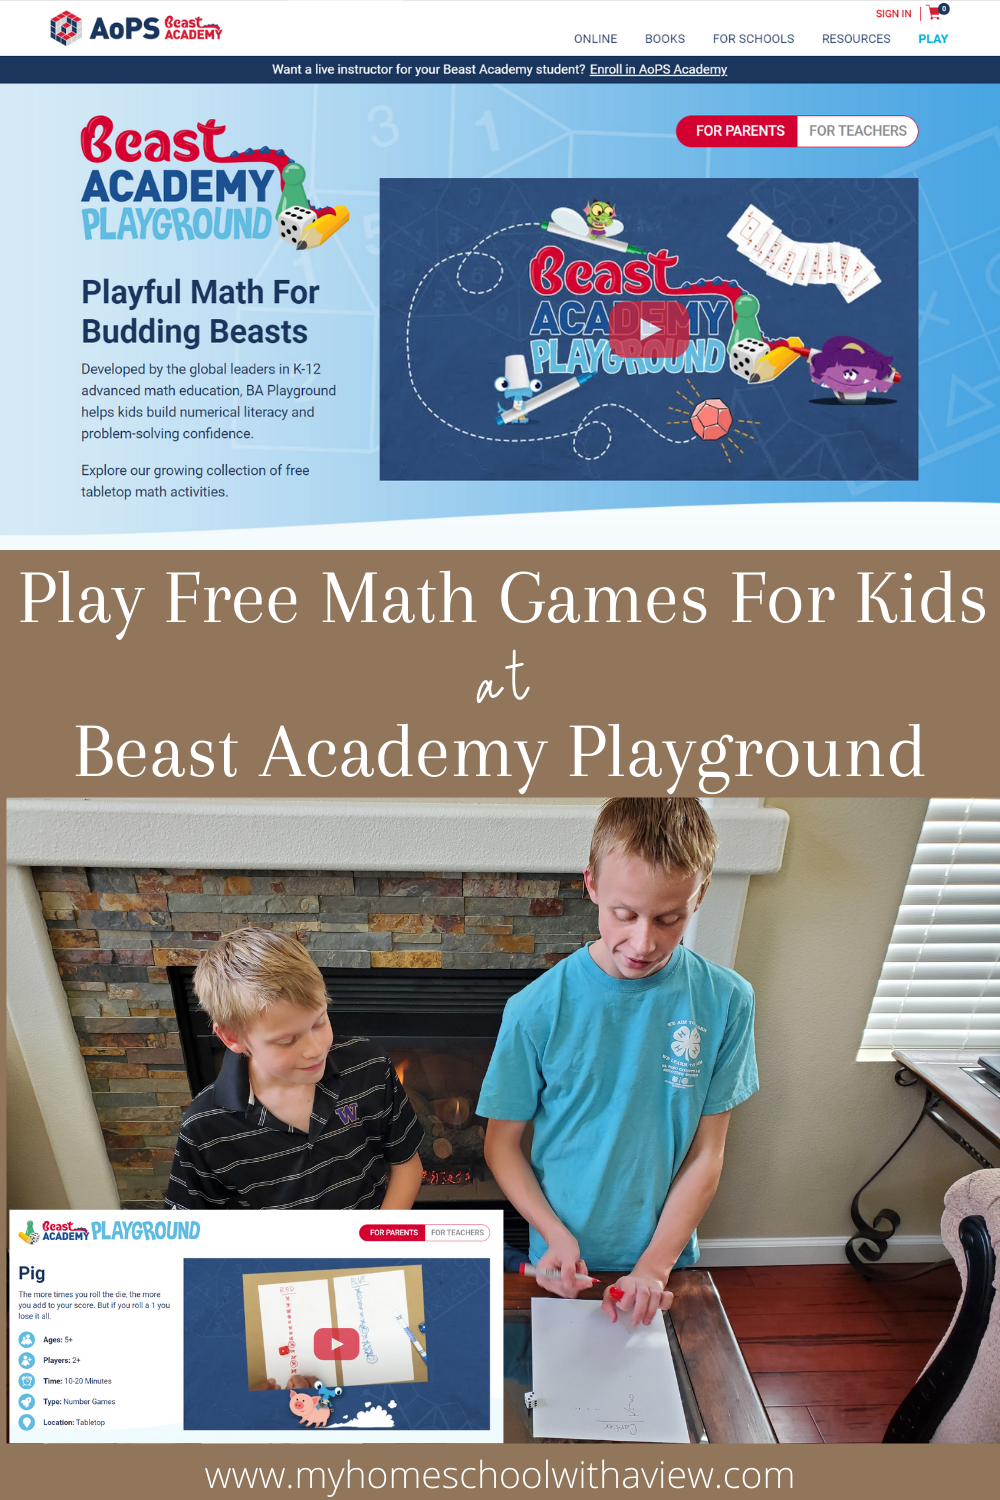 Play Free Math Games for Kids